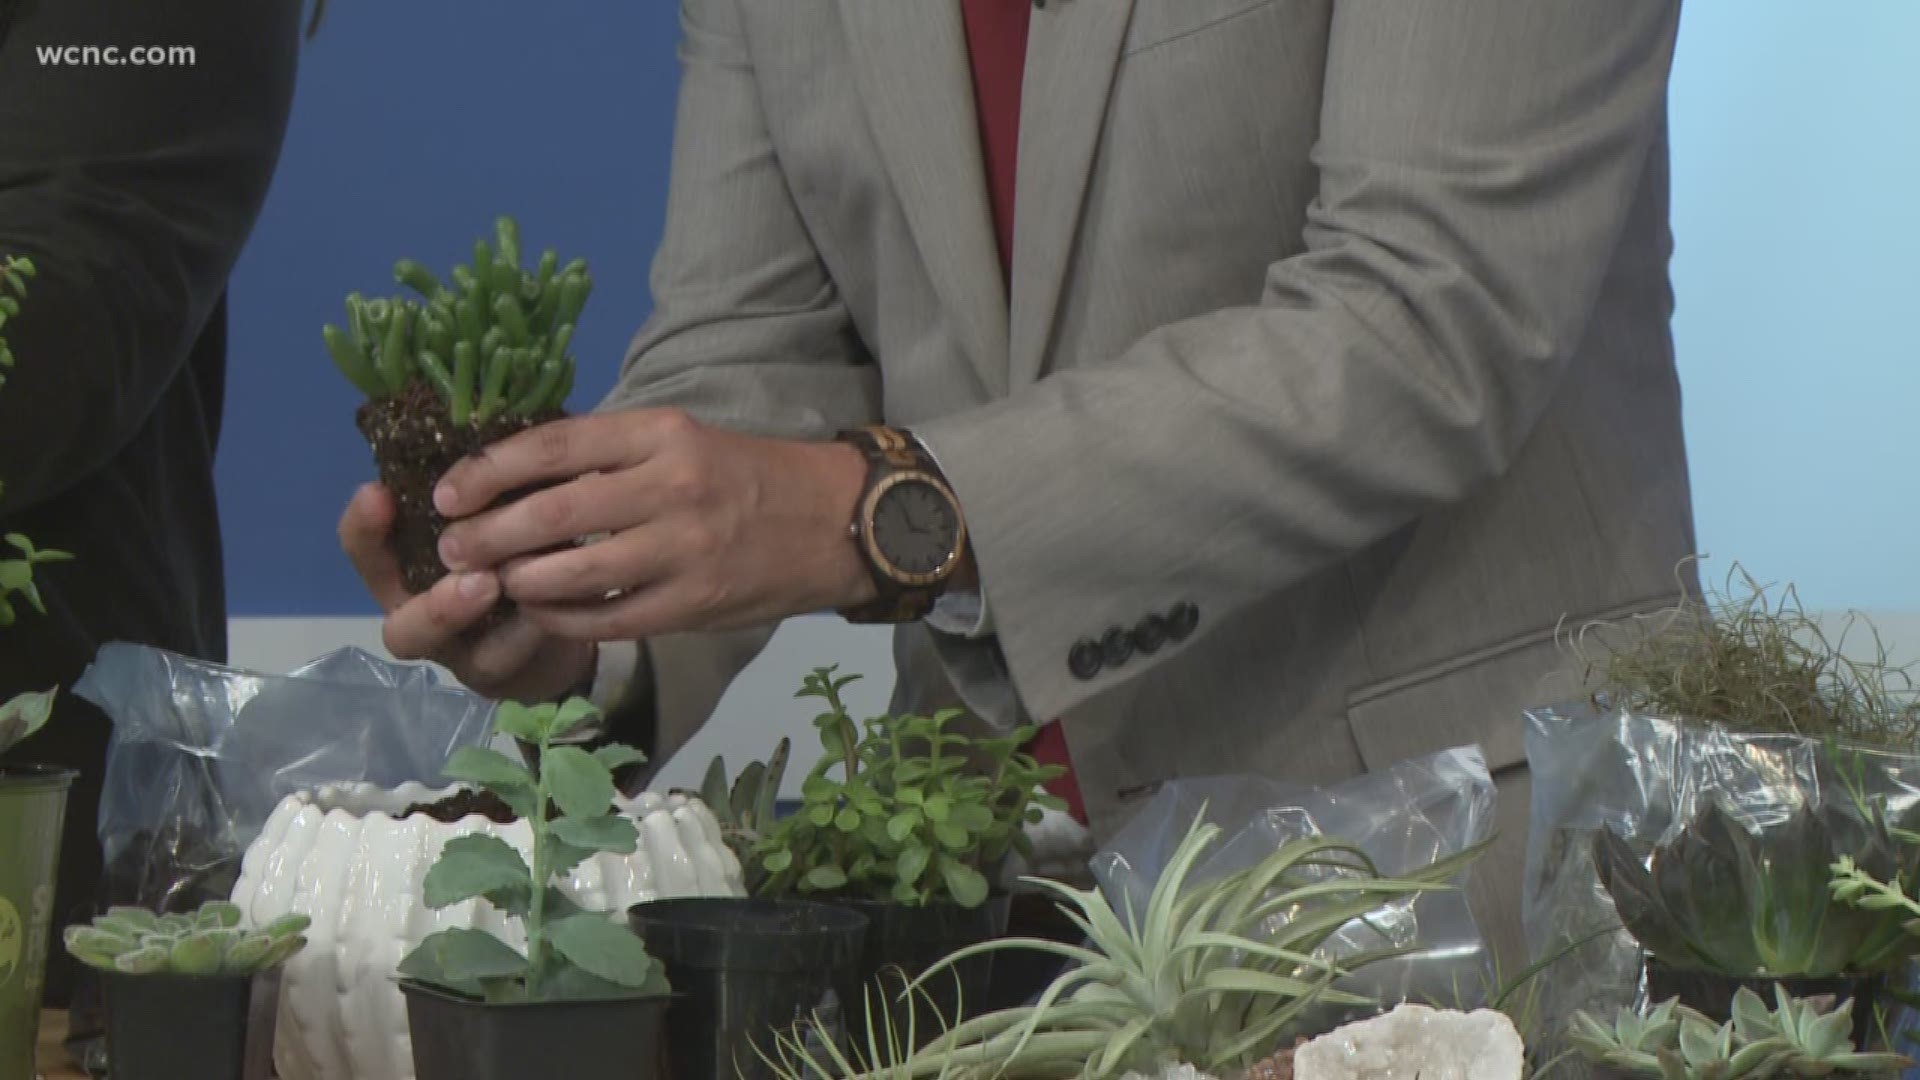 Owner of City Stems, Laura Hughes shows how to plant succulents heading into warm weather season.